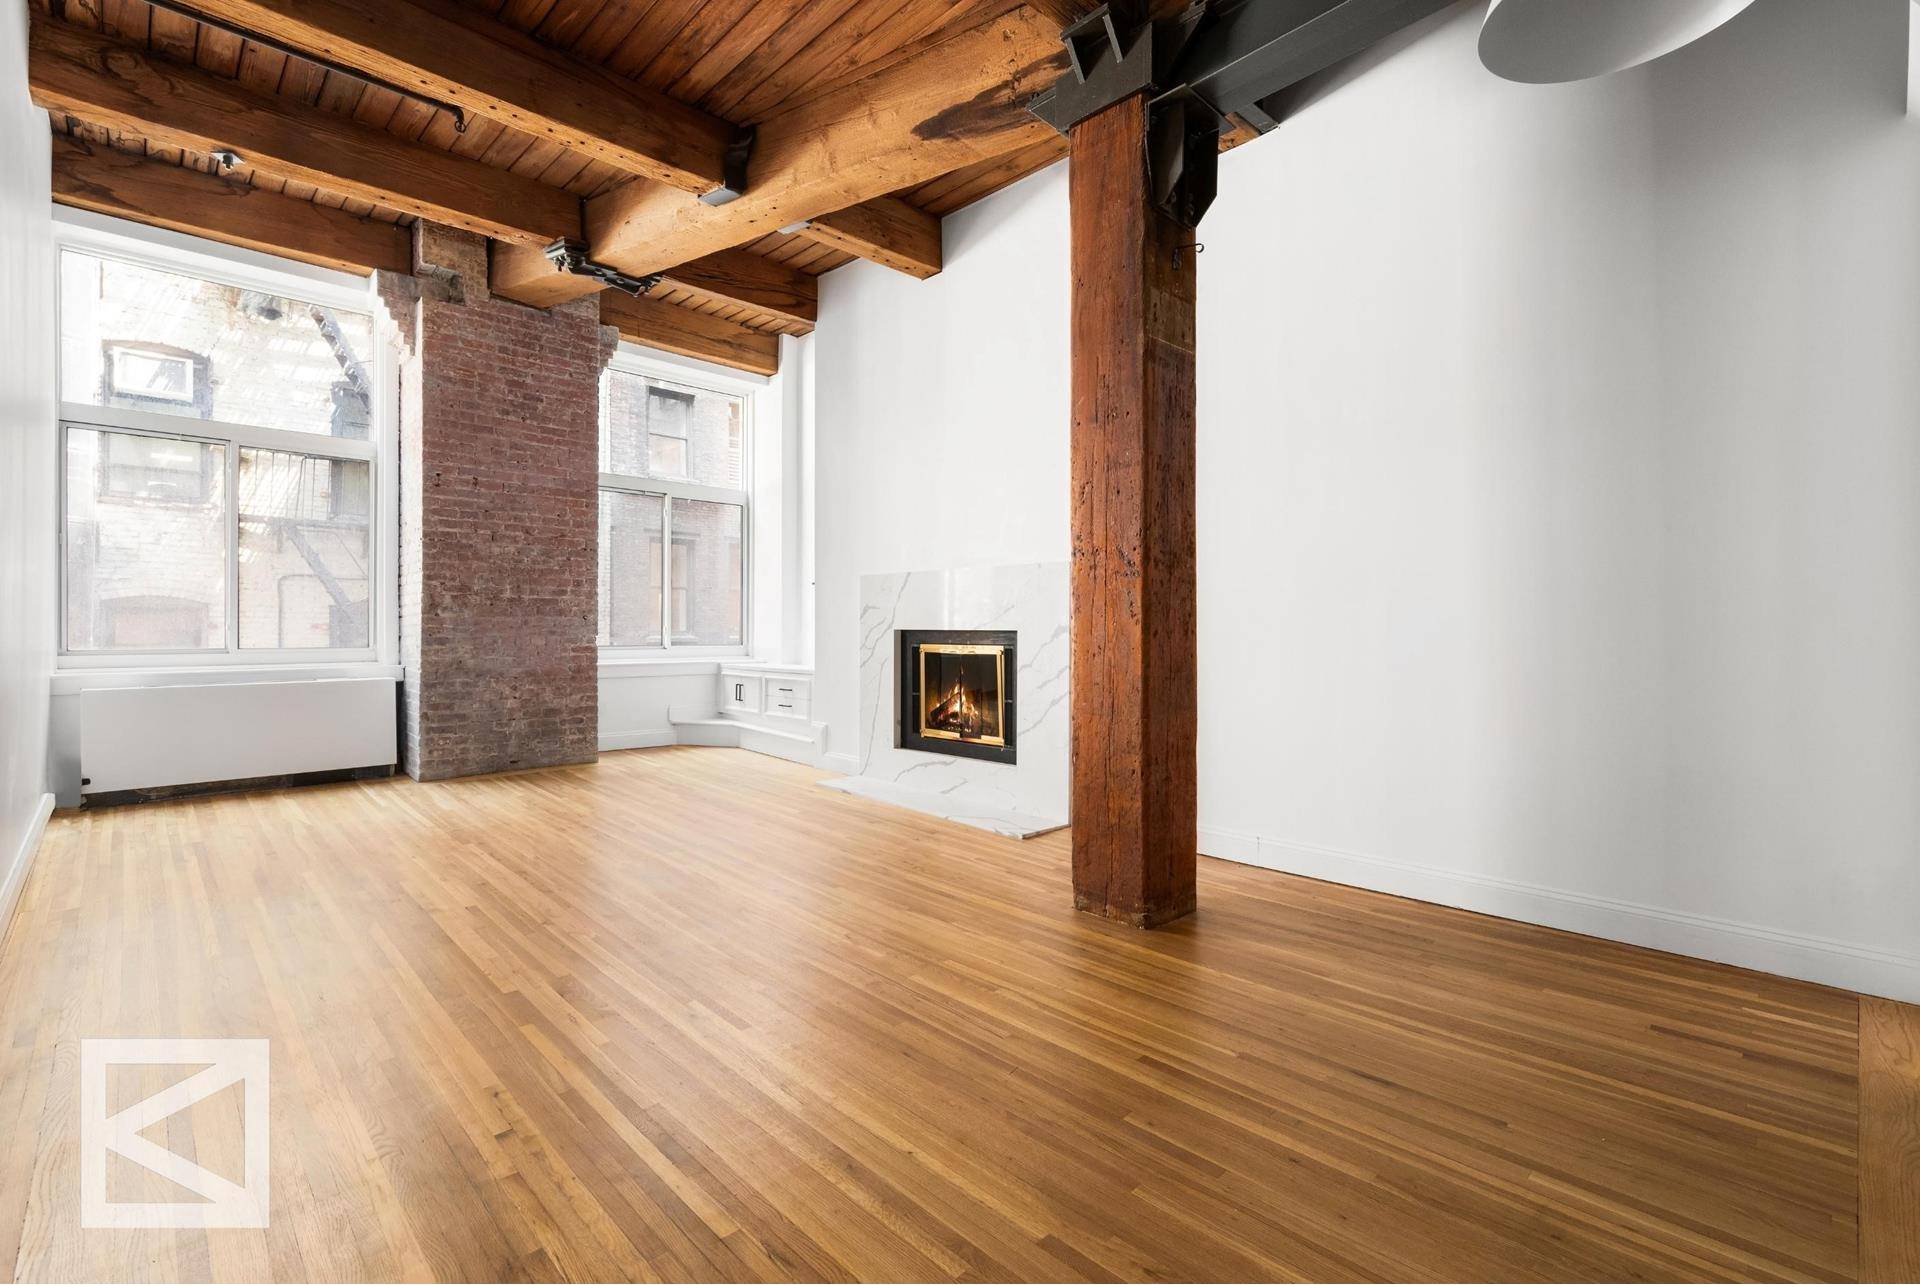 Beautifully renovated three bedroom, two bathroom corner loft, boasting soaring 12' beamed ceilings, exposed brick, two wood burning fireplaces and new oversized 8' thermal windows.